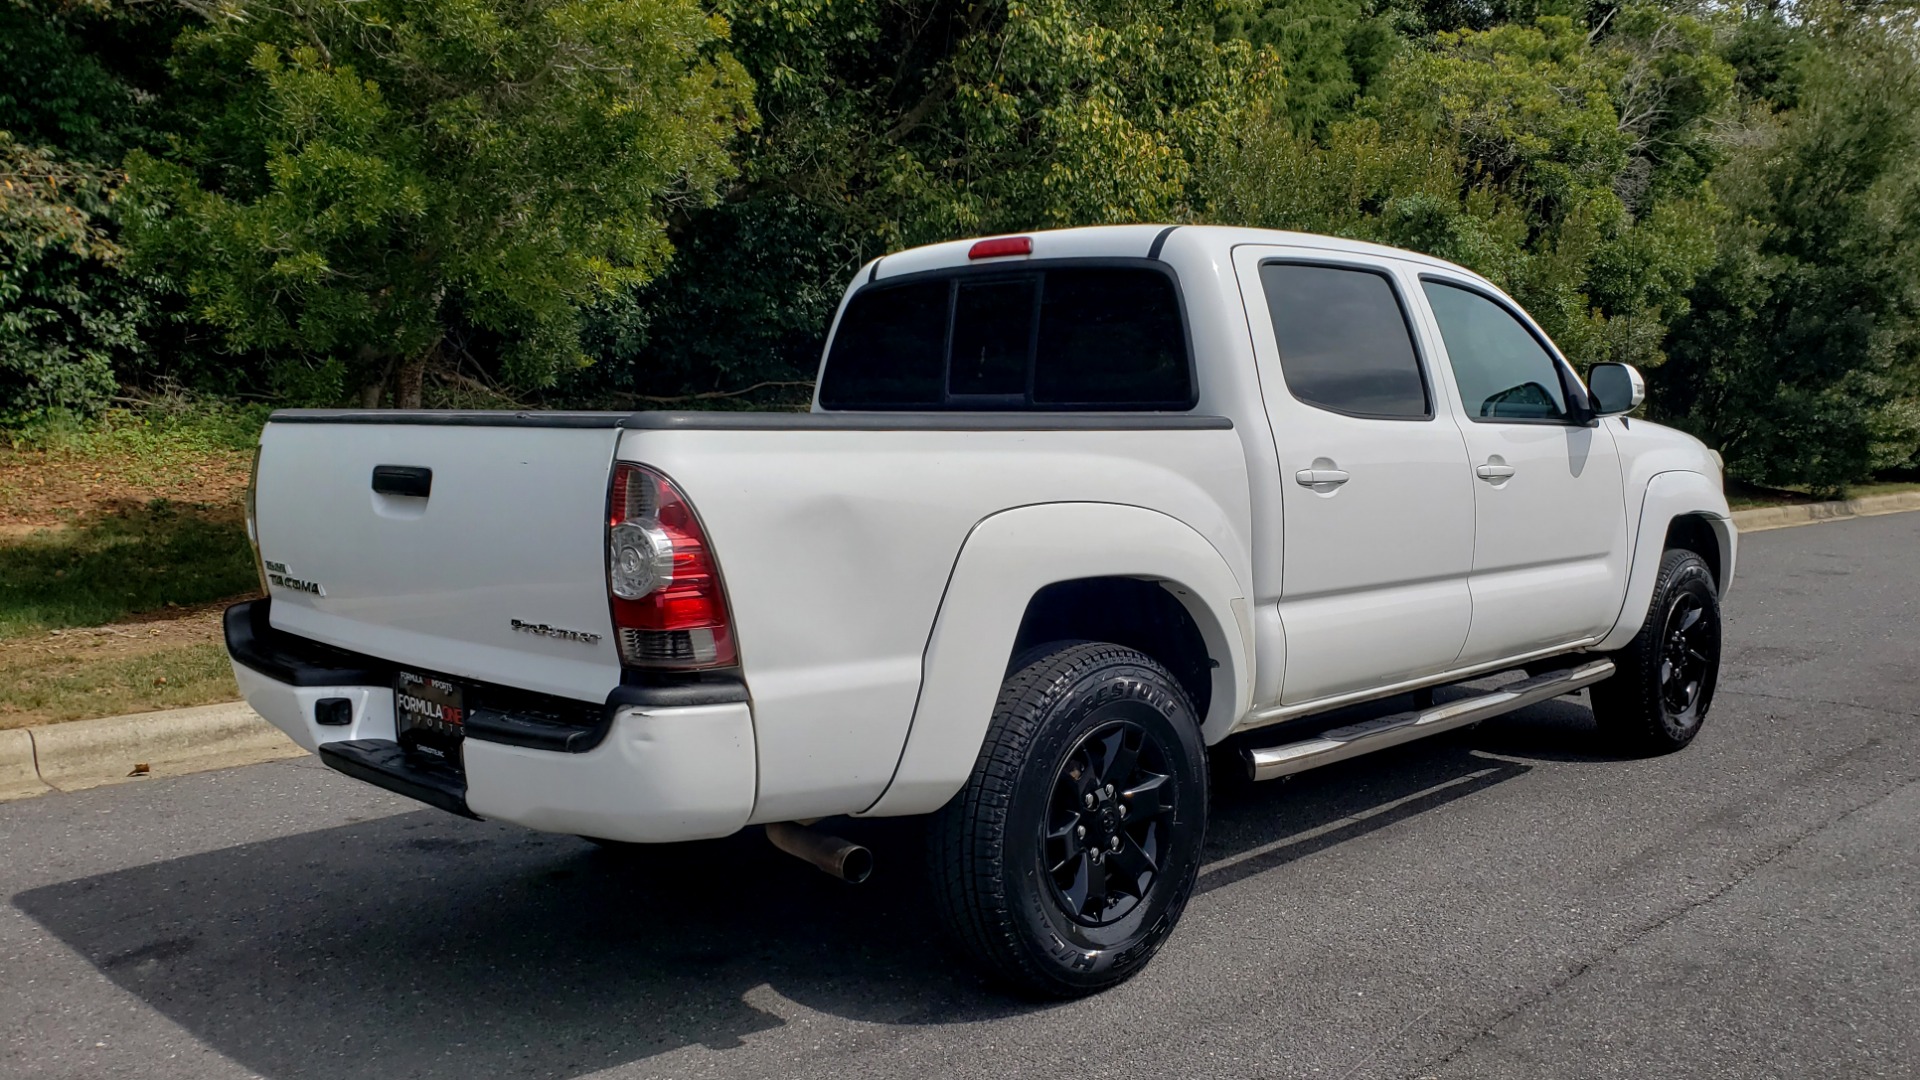 Used 2015 Toyota TACOMA PRERUNNER DOUBLE CAB/ 4-CYL / 4-SPD AUTO / SR PKG / CONV PKG for sale Sold at Formula Imports in Charlotte NC 28227 6